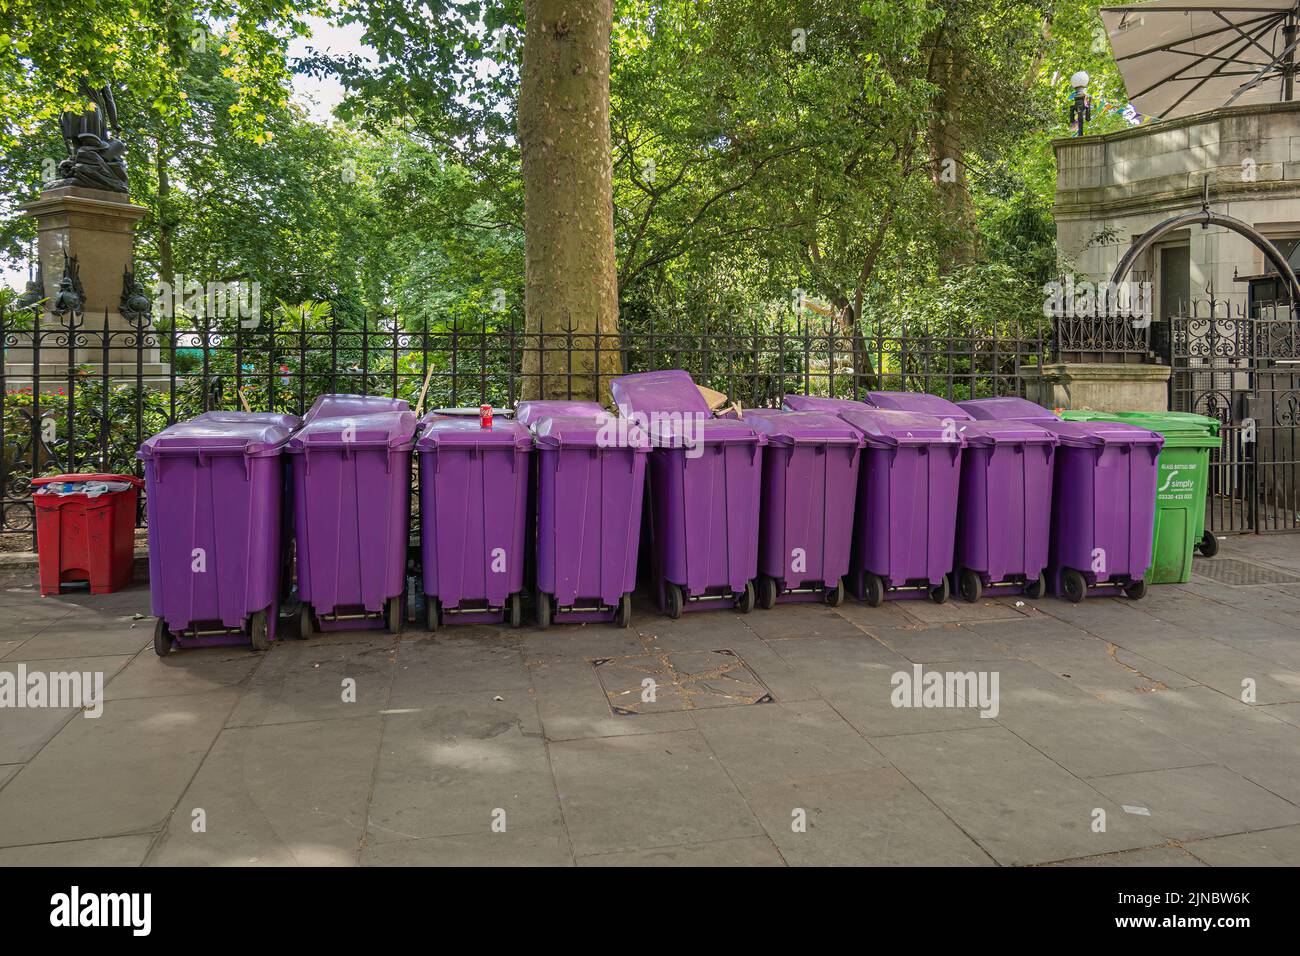 London, UK- July 4, 2022: Row of purple garbage cans outside Whitehall gardens. Green foliage and Sir James Outram statue in back. Stock Photo